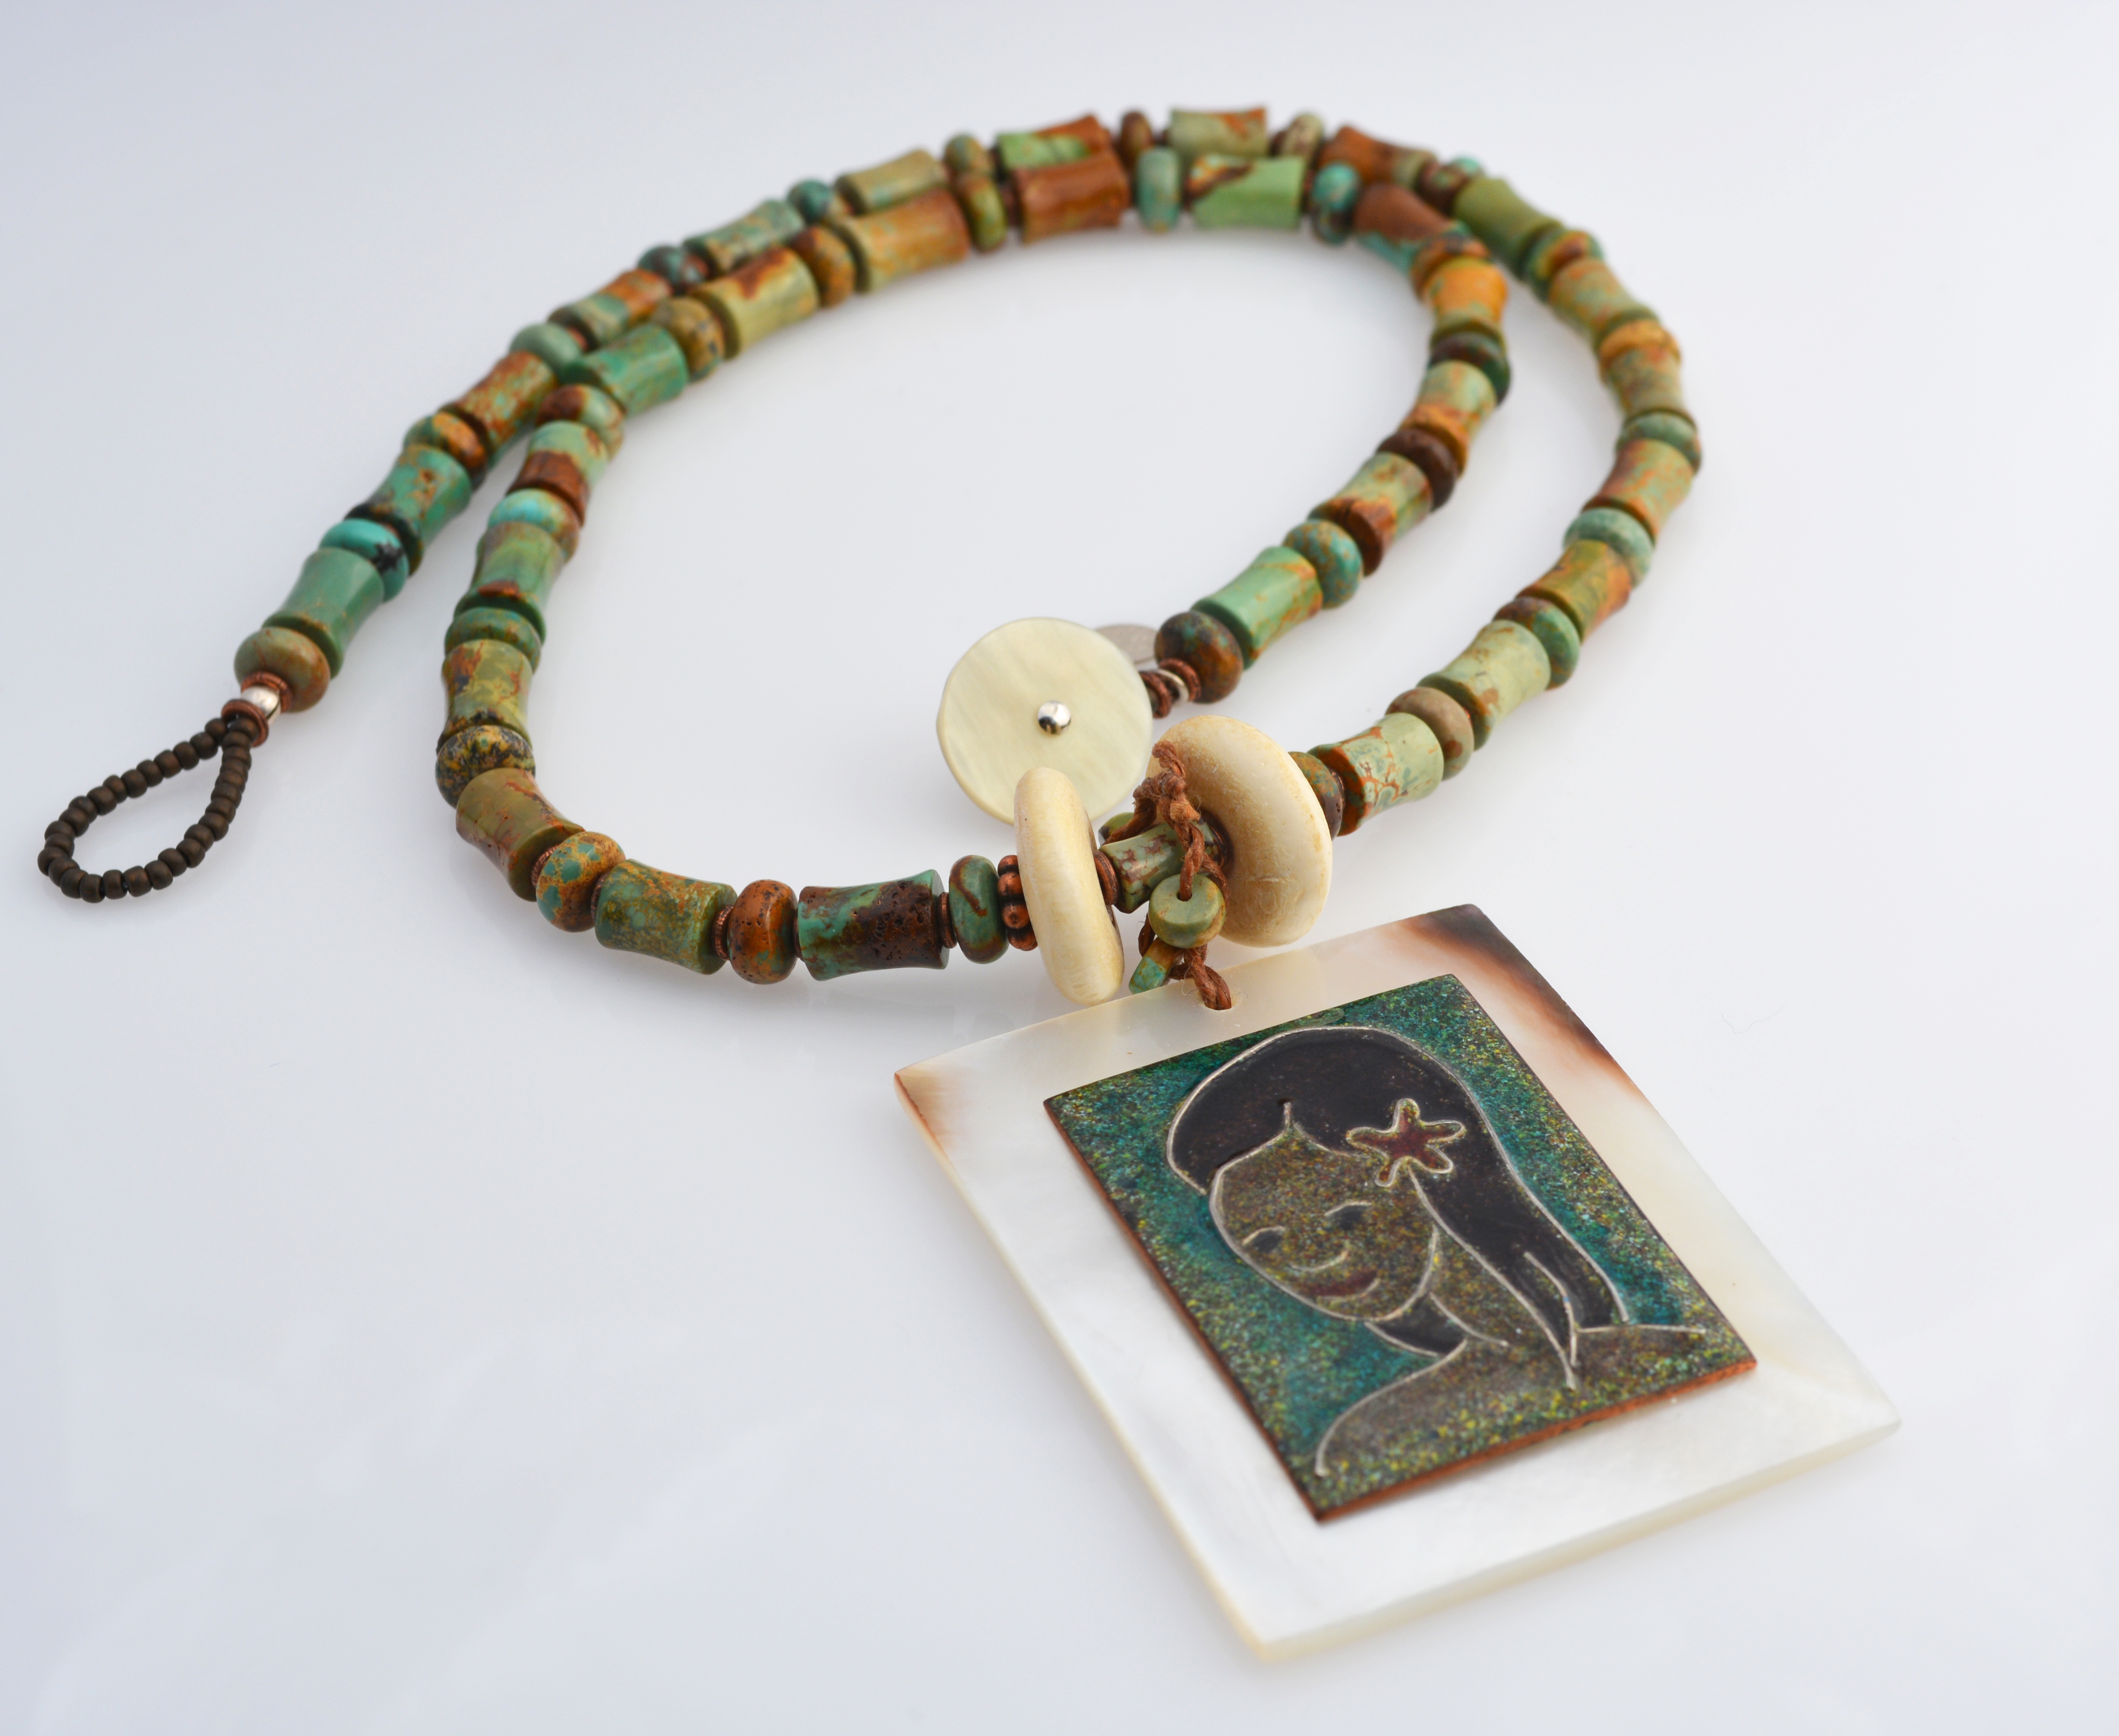 Vintage enamel and mother of pearl focal with turquoise necklace